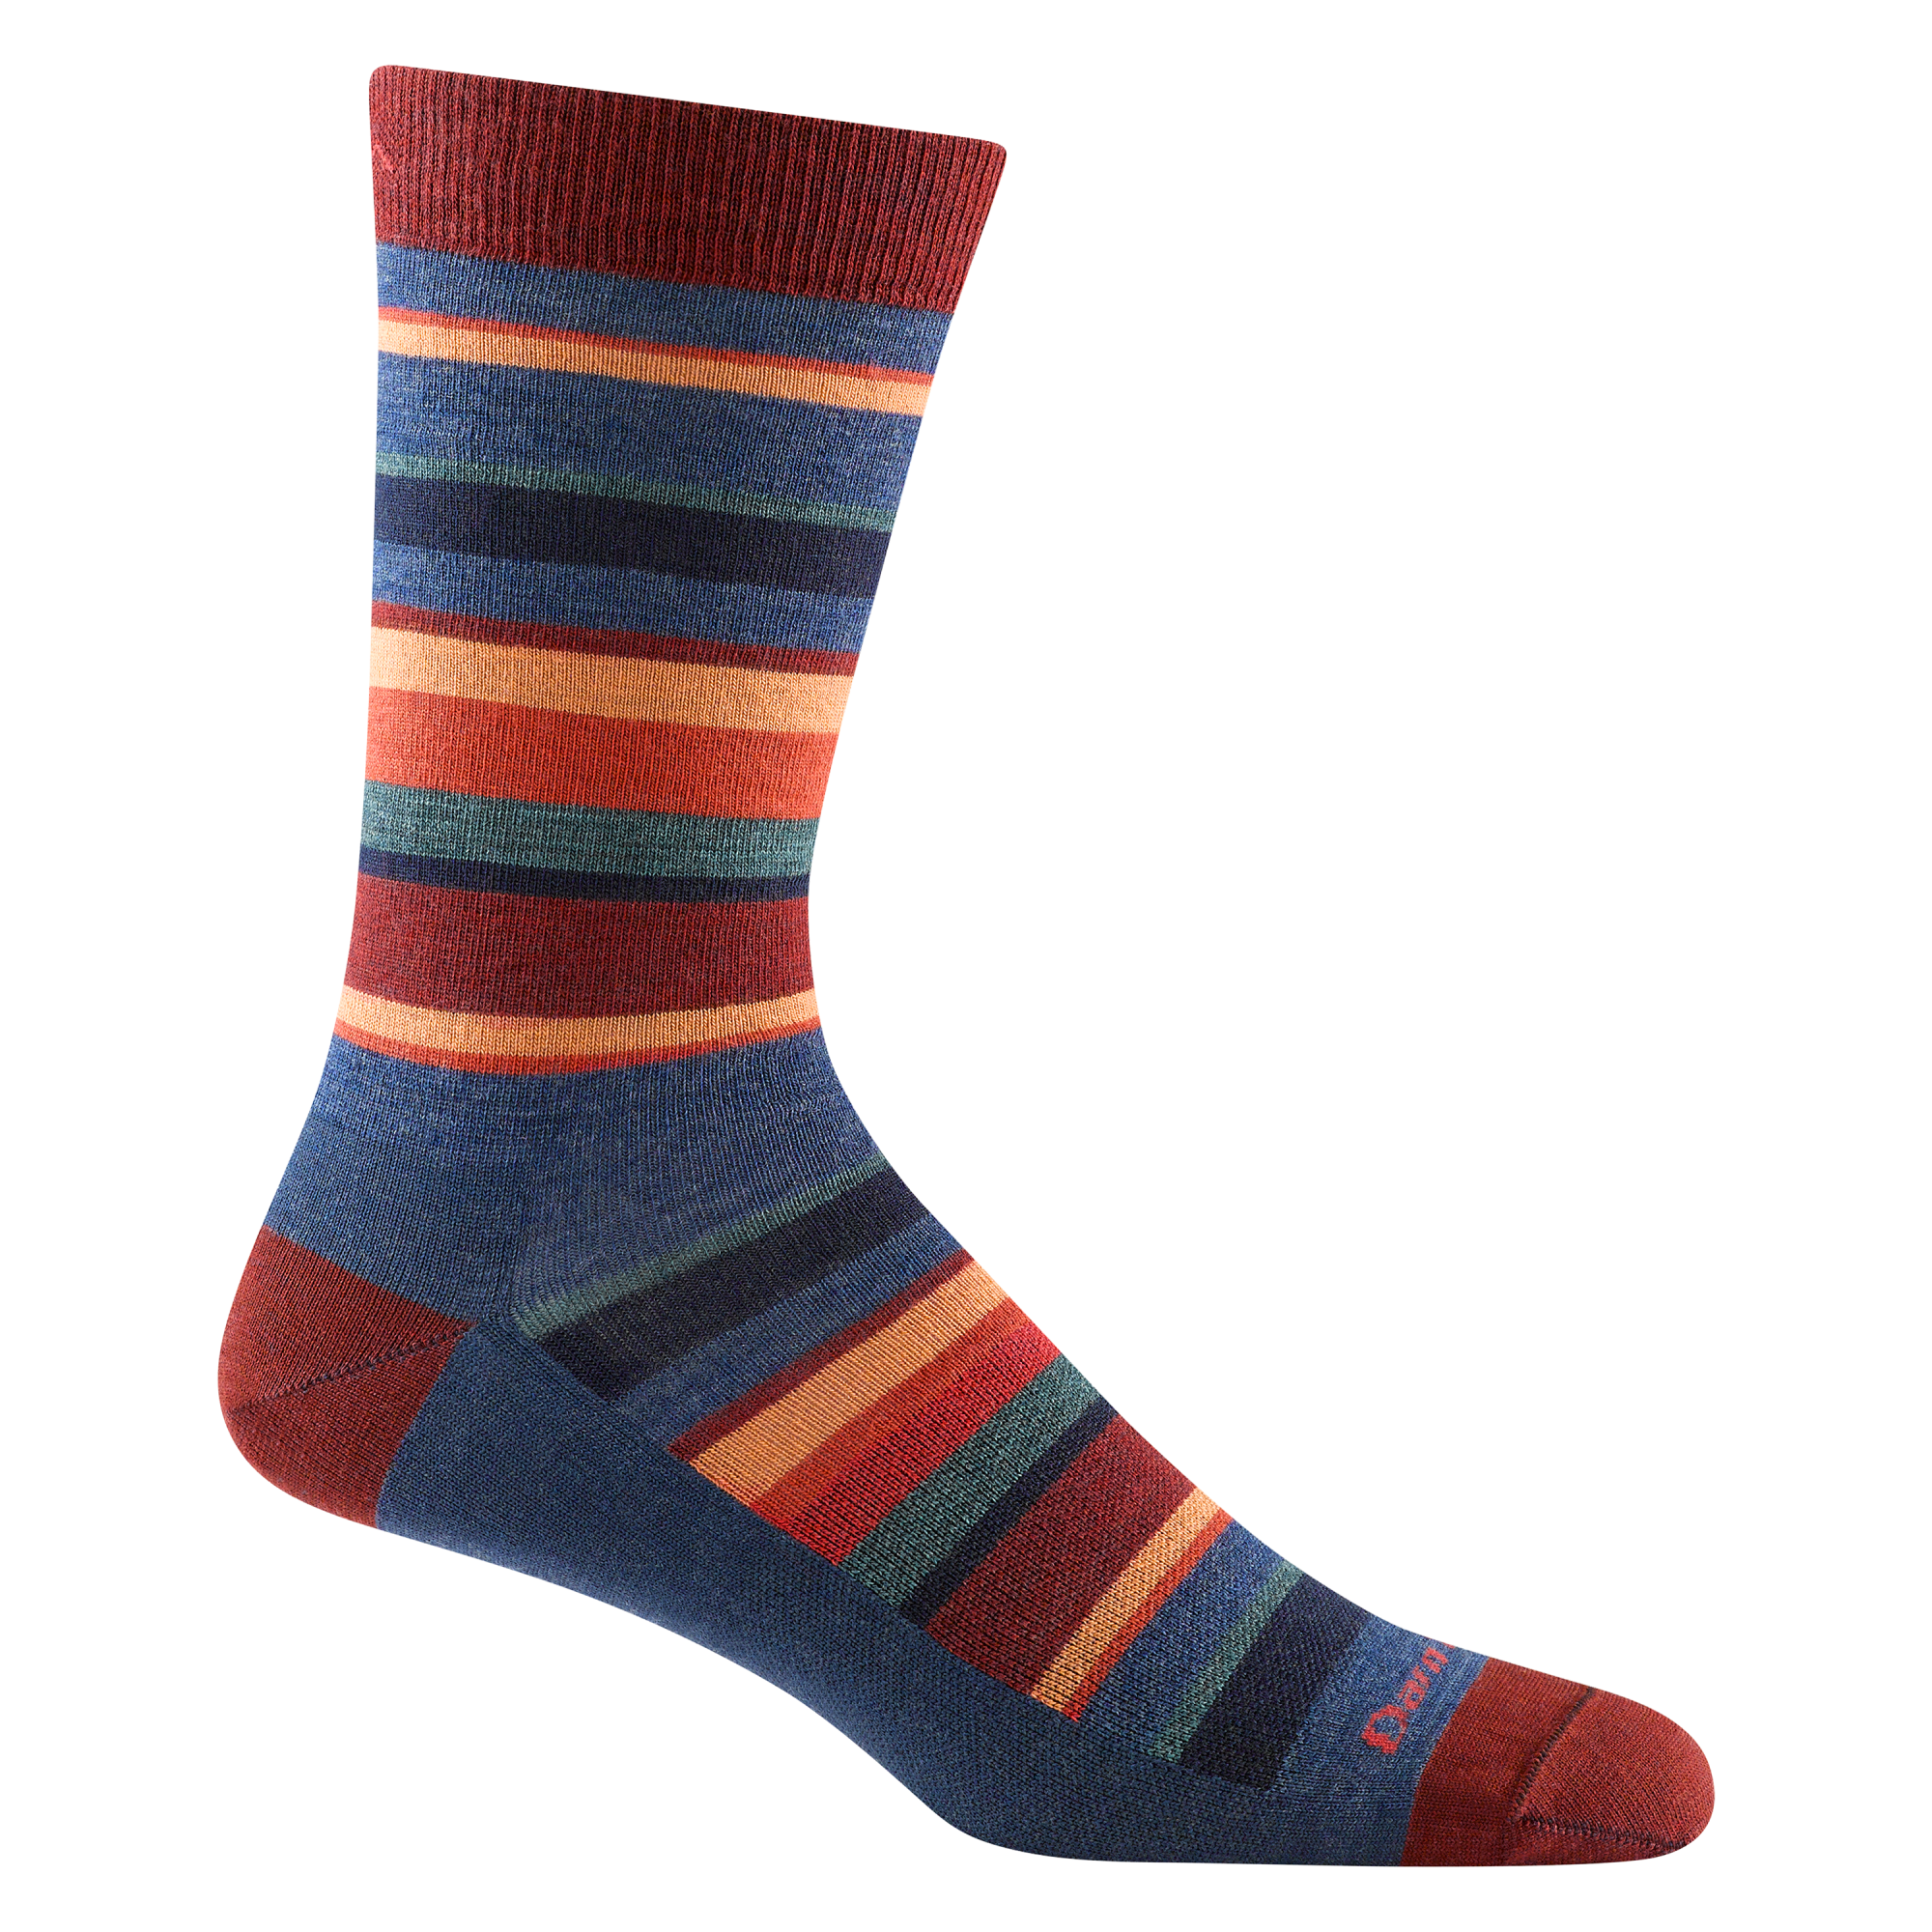 6090 men's druid crew lifestyle sock in color denim blue with red toe/heel accents and orange, red, and blue striping